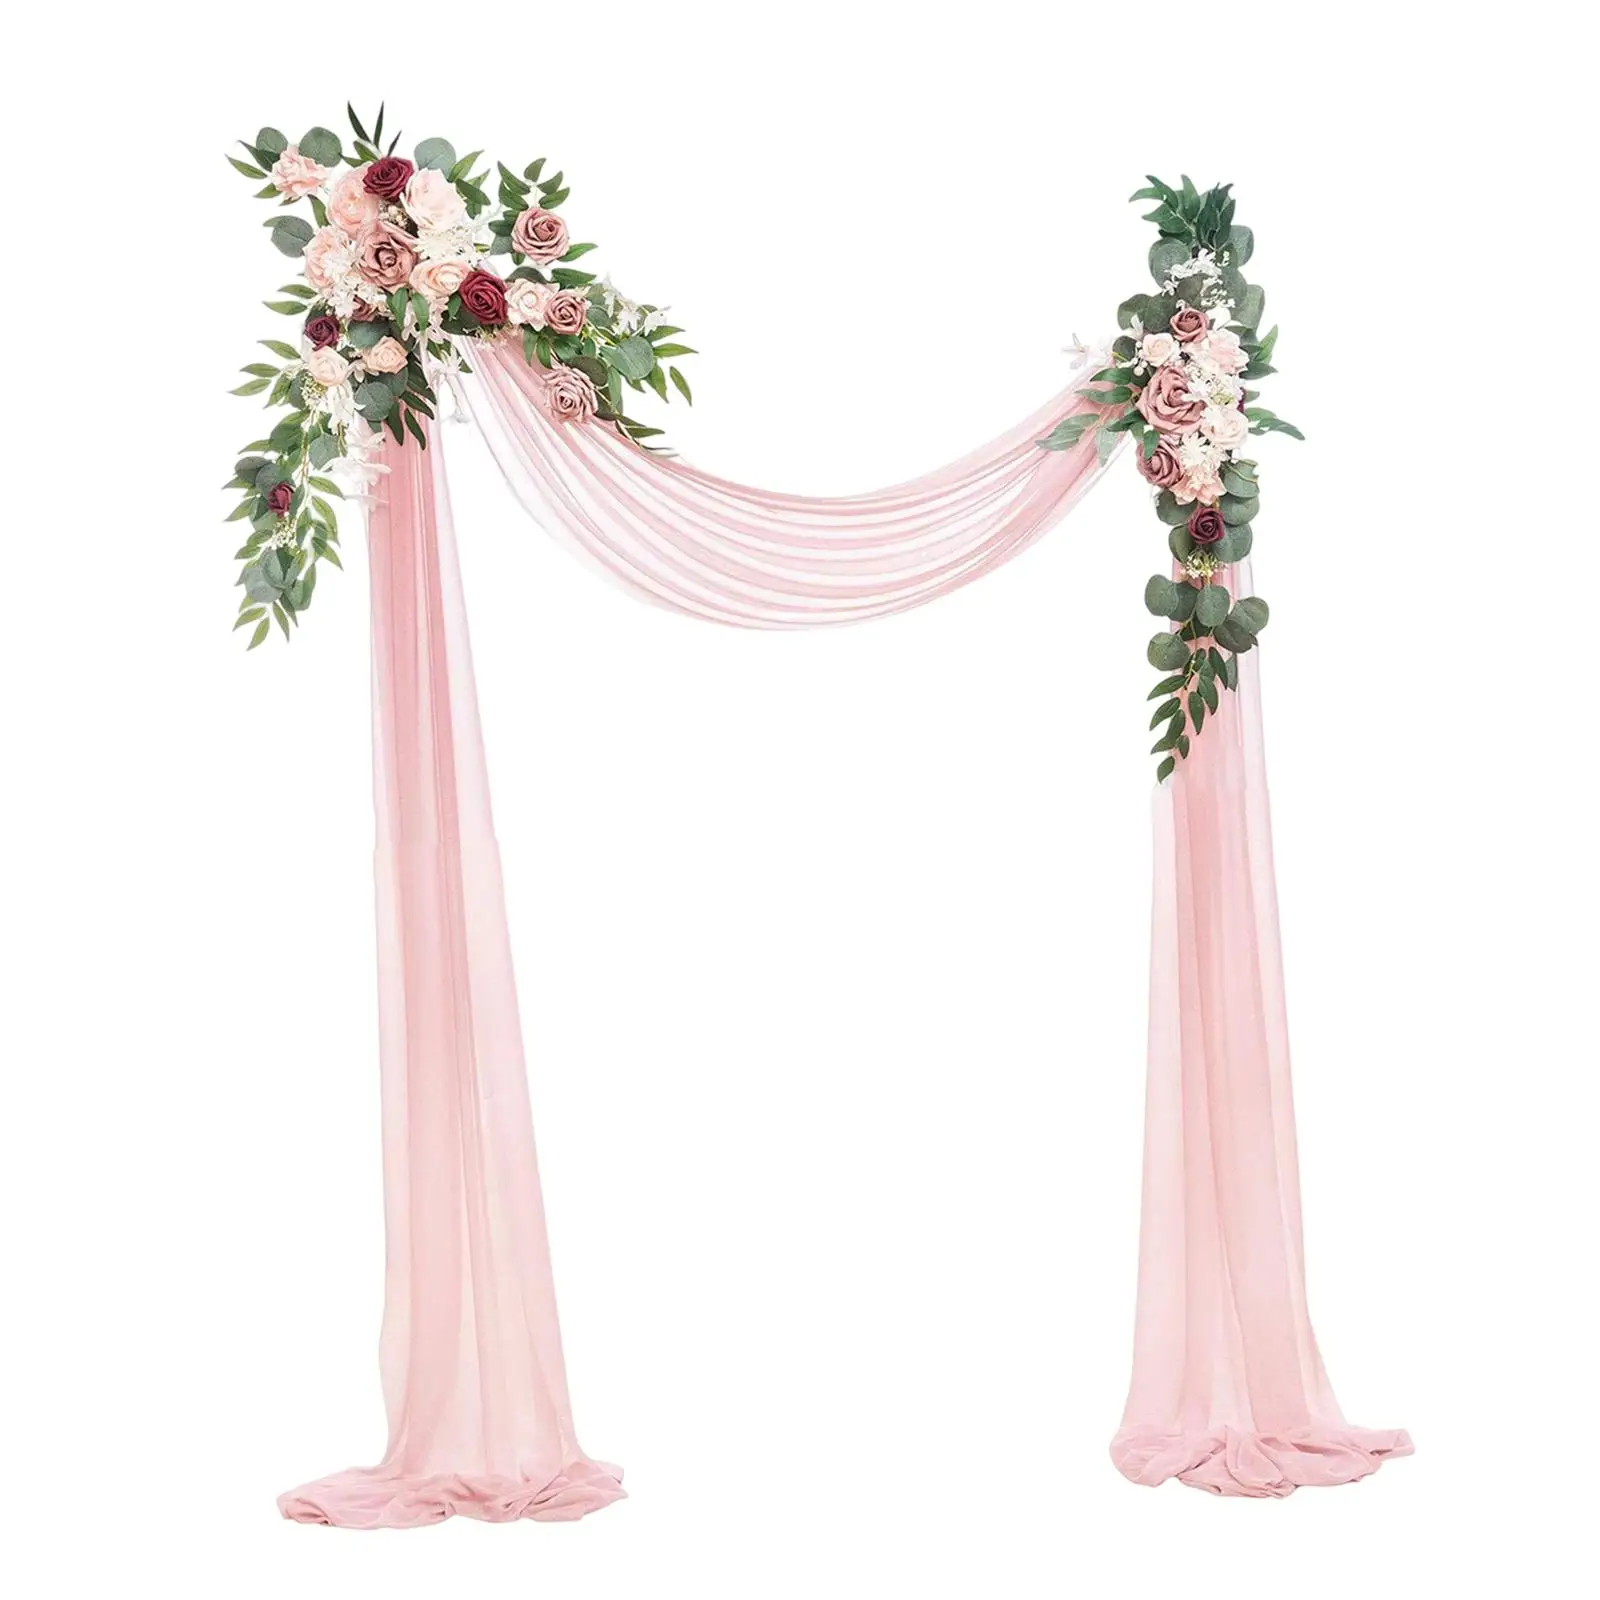 Artificial Wedding Arch Flowers Kit, Centerpiece Garland Artificial Flower Swag for Wall